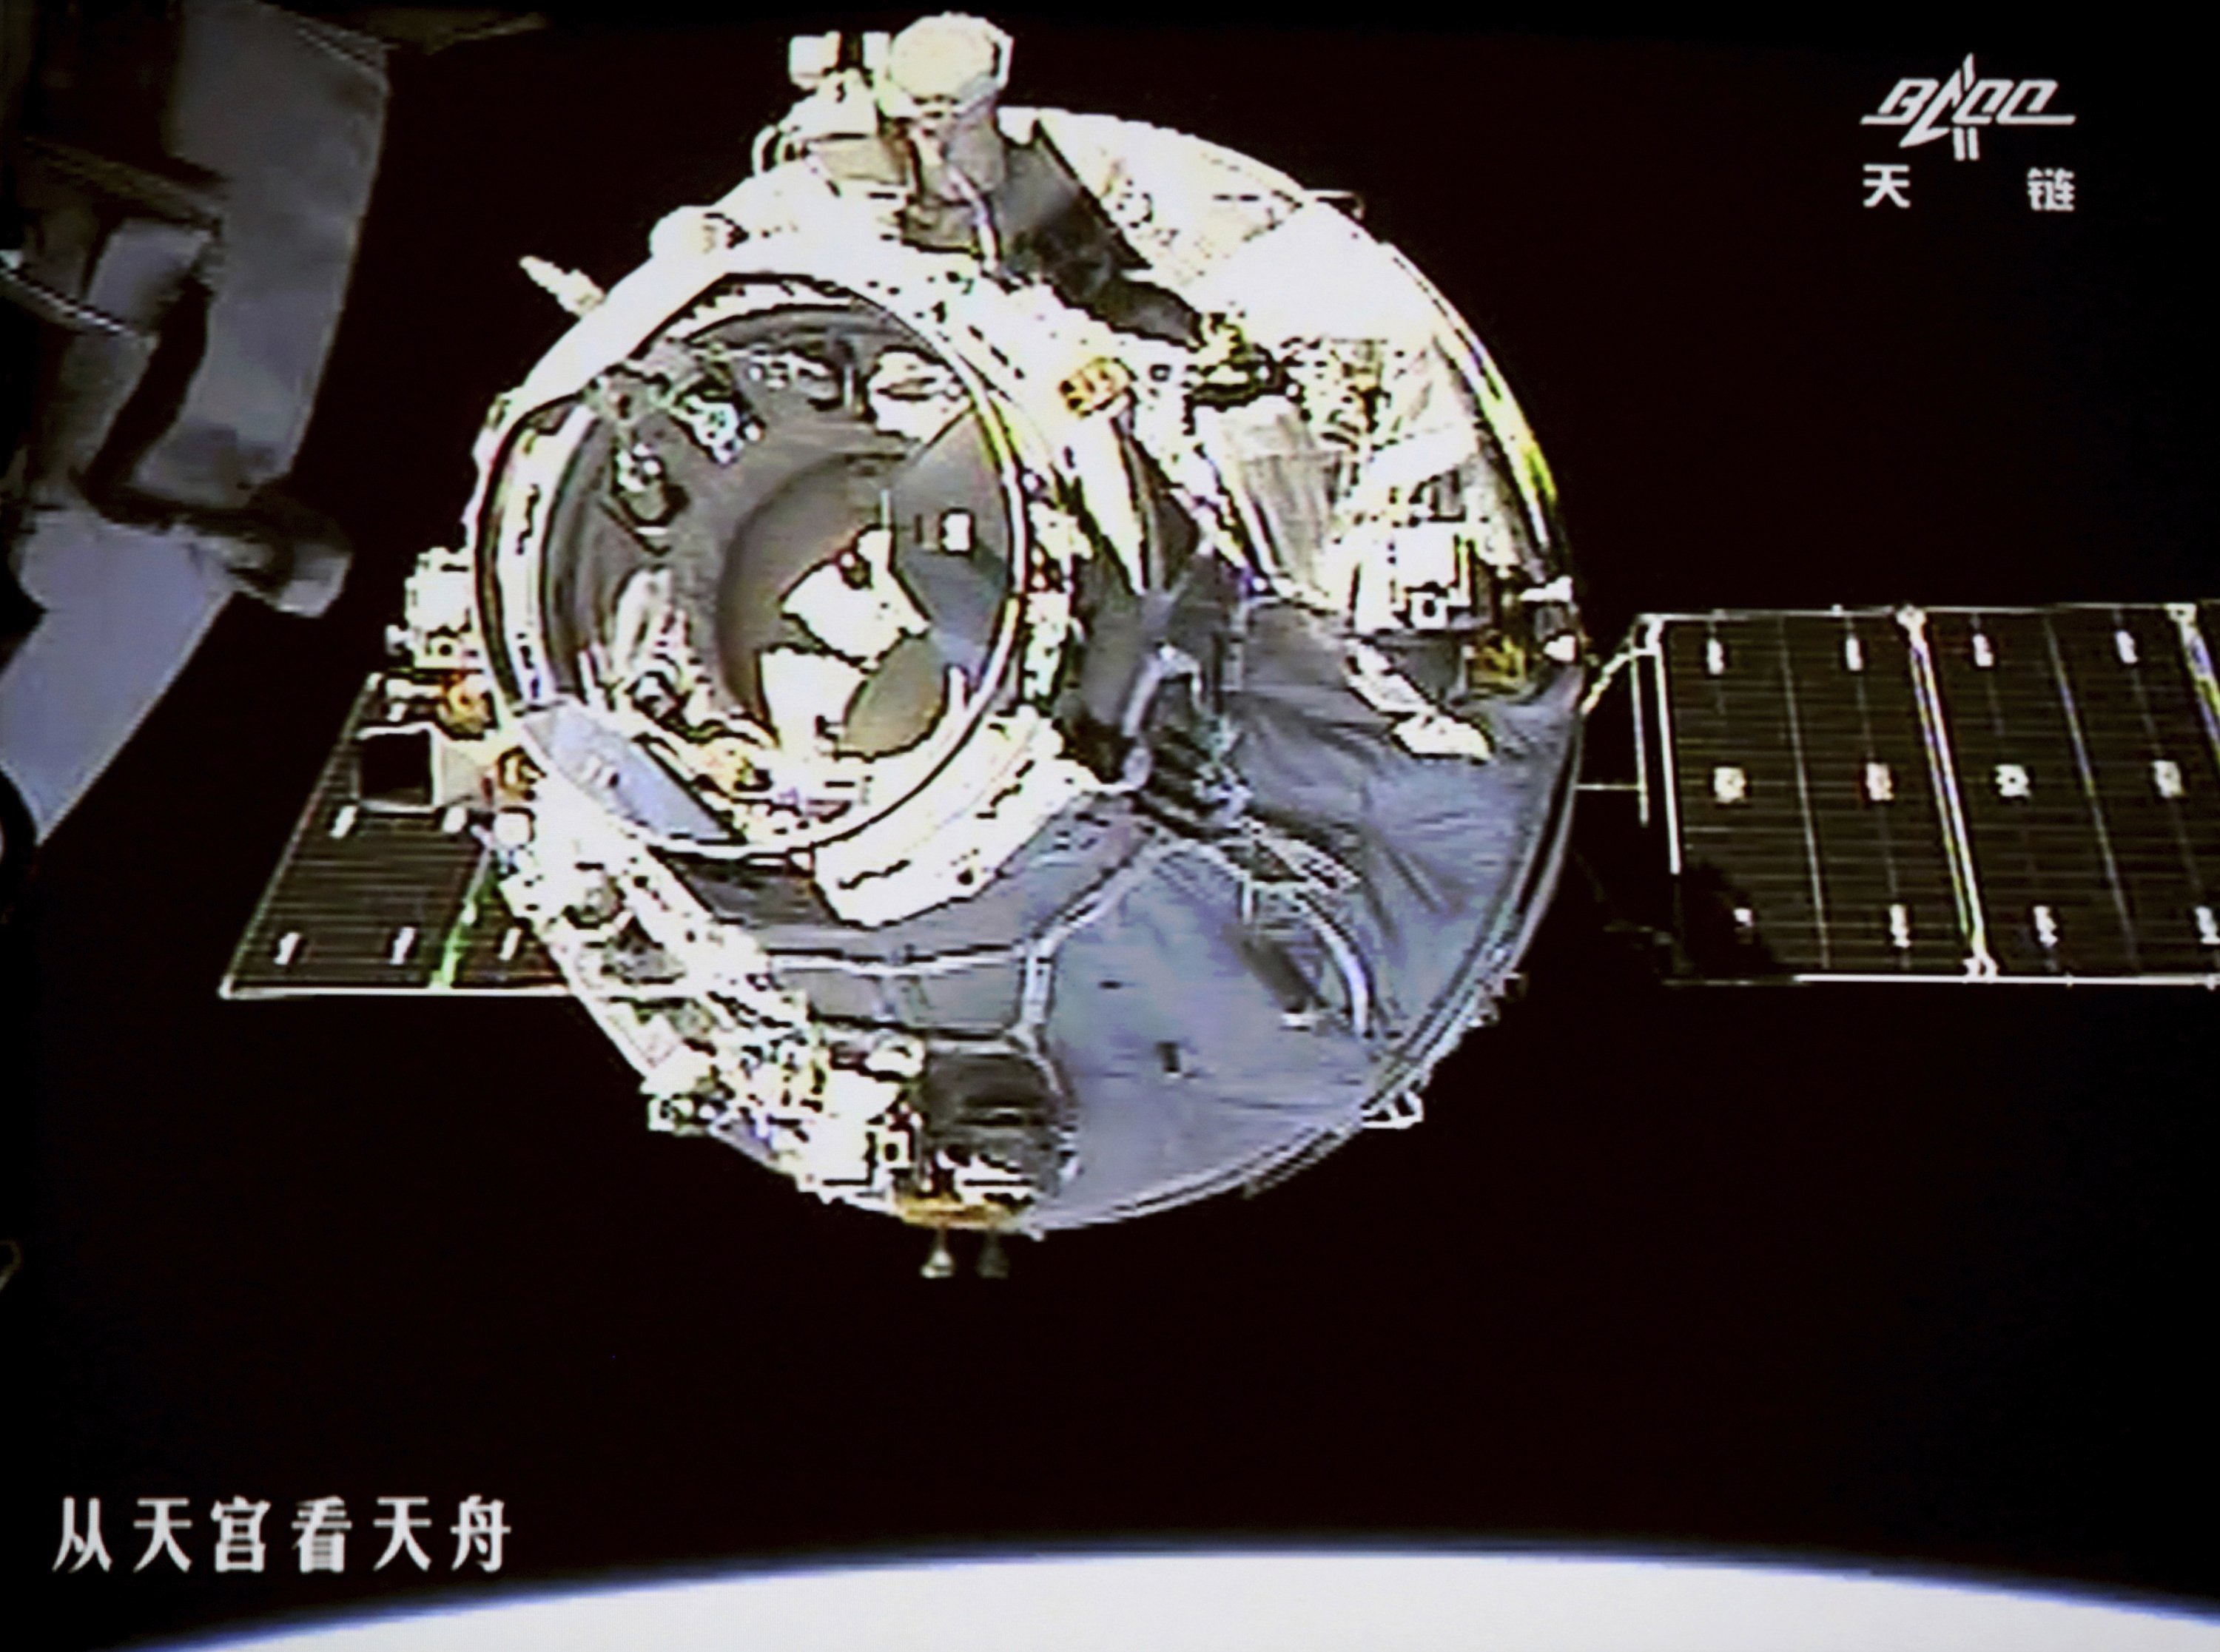 The Tianzhou-1 cargo spacecraft sails to the Tiangong-2 space laboratory for docking